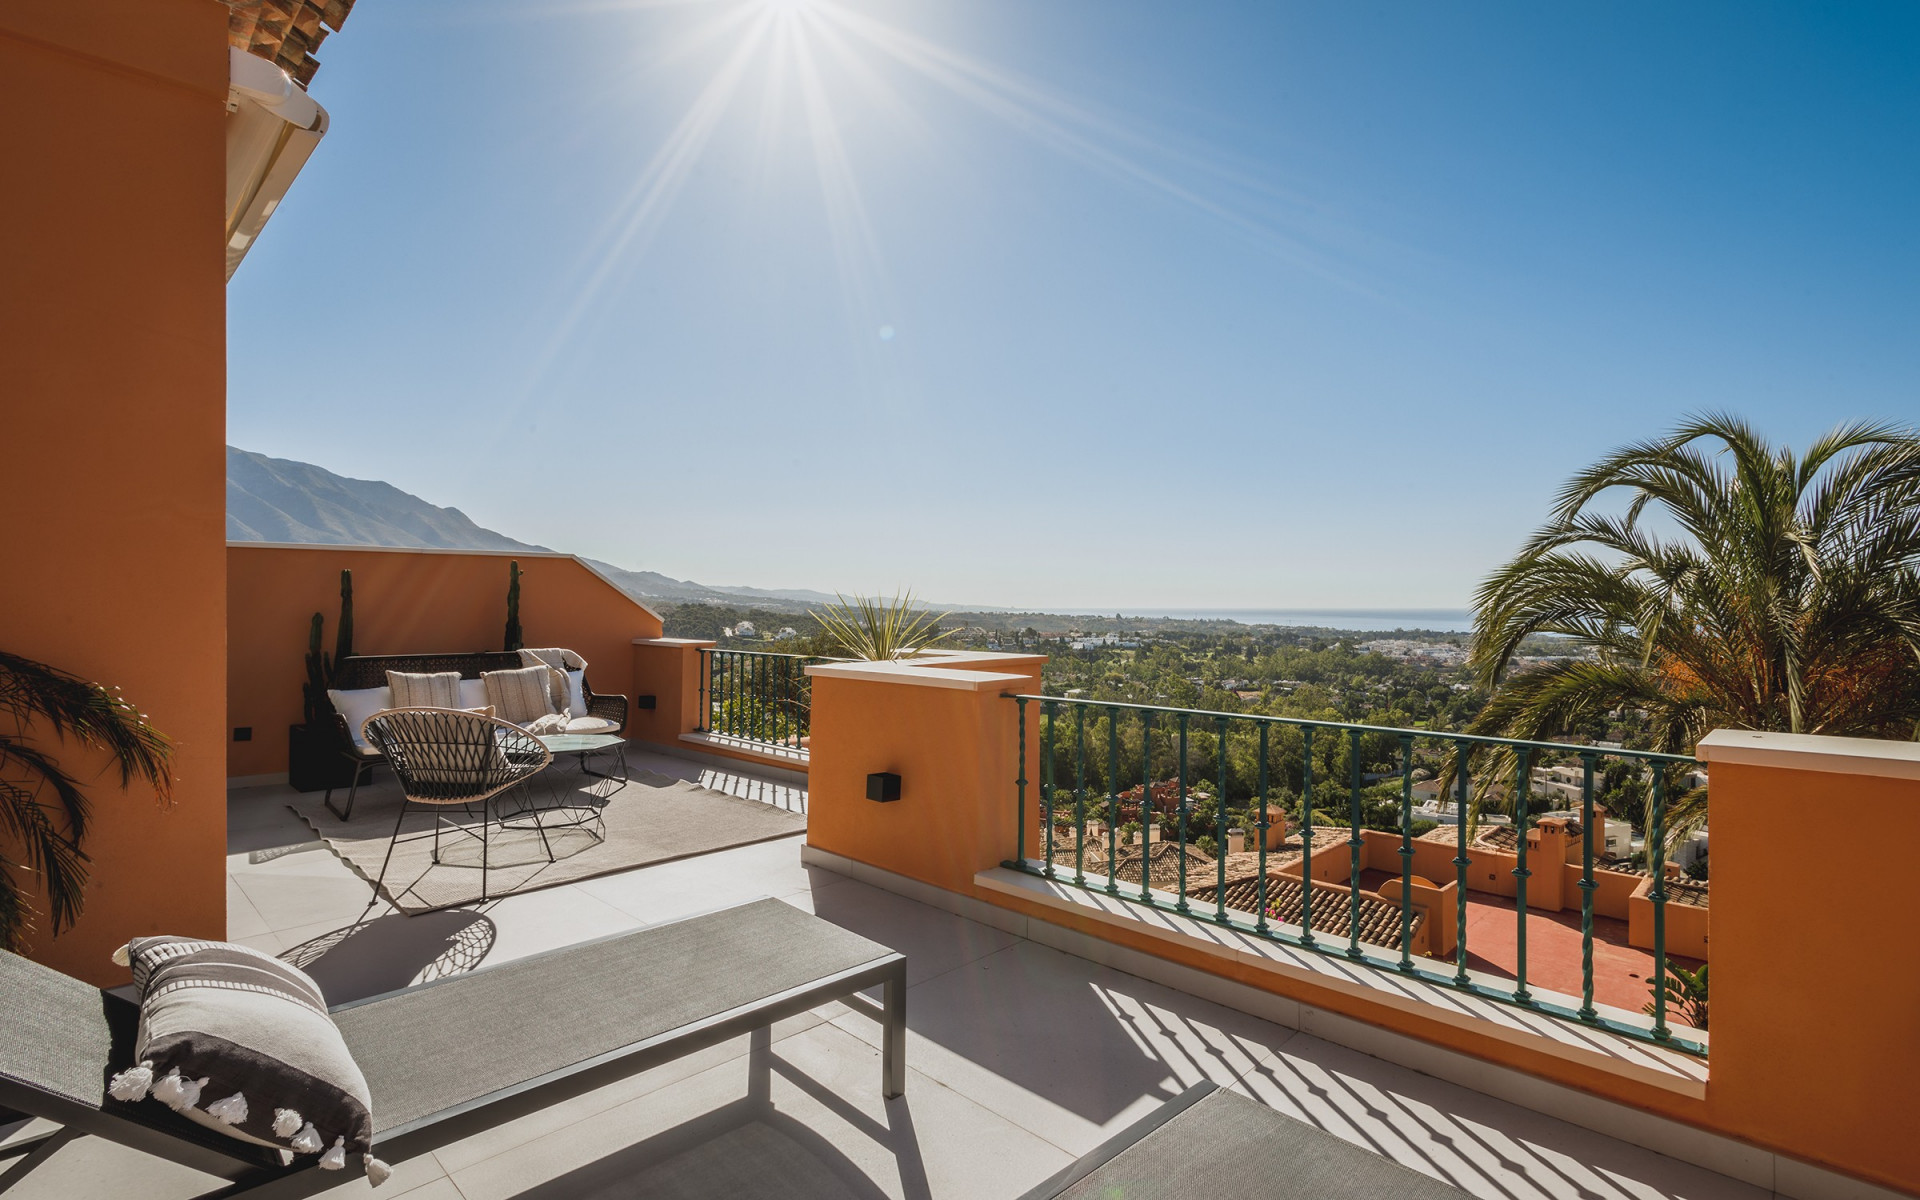 Spectacular duplex penthouse with incredible views to the Golf Valley and the Mediterranean Sea.